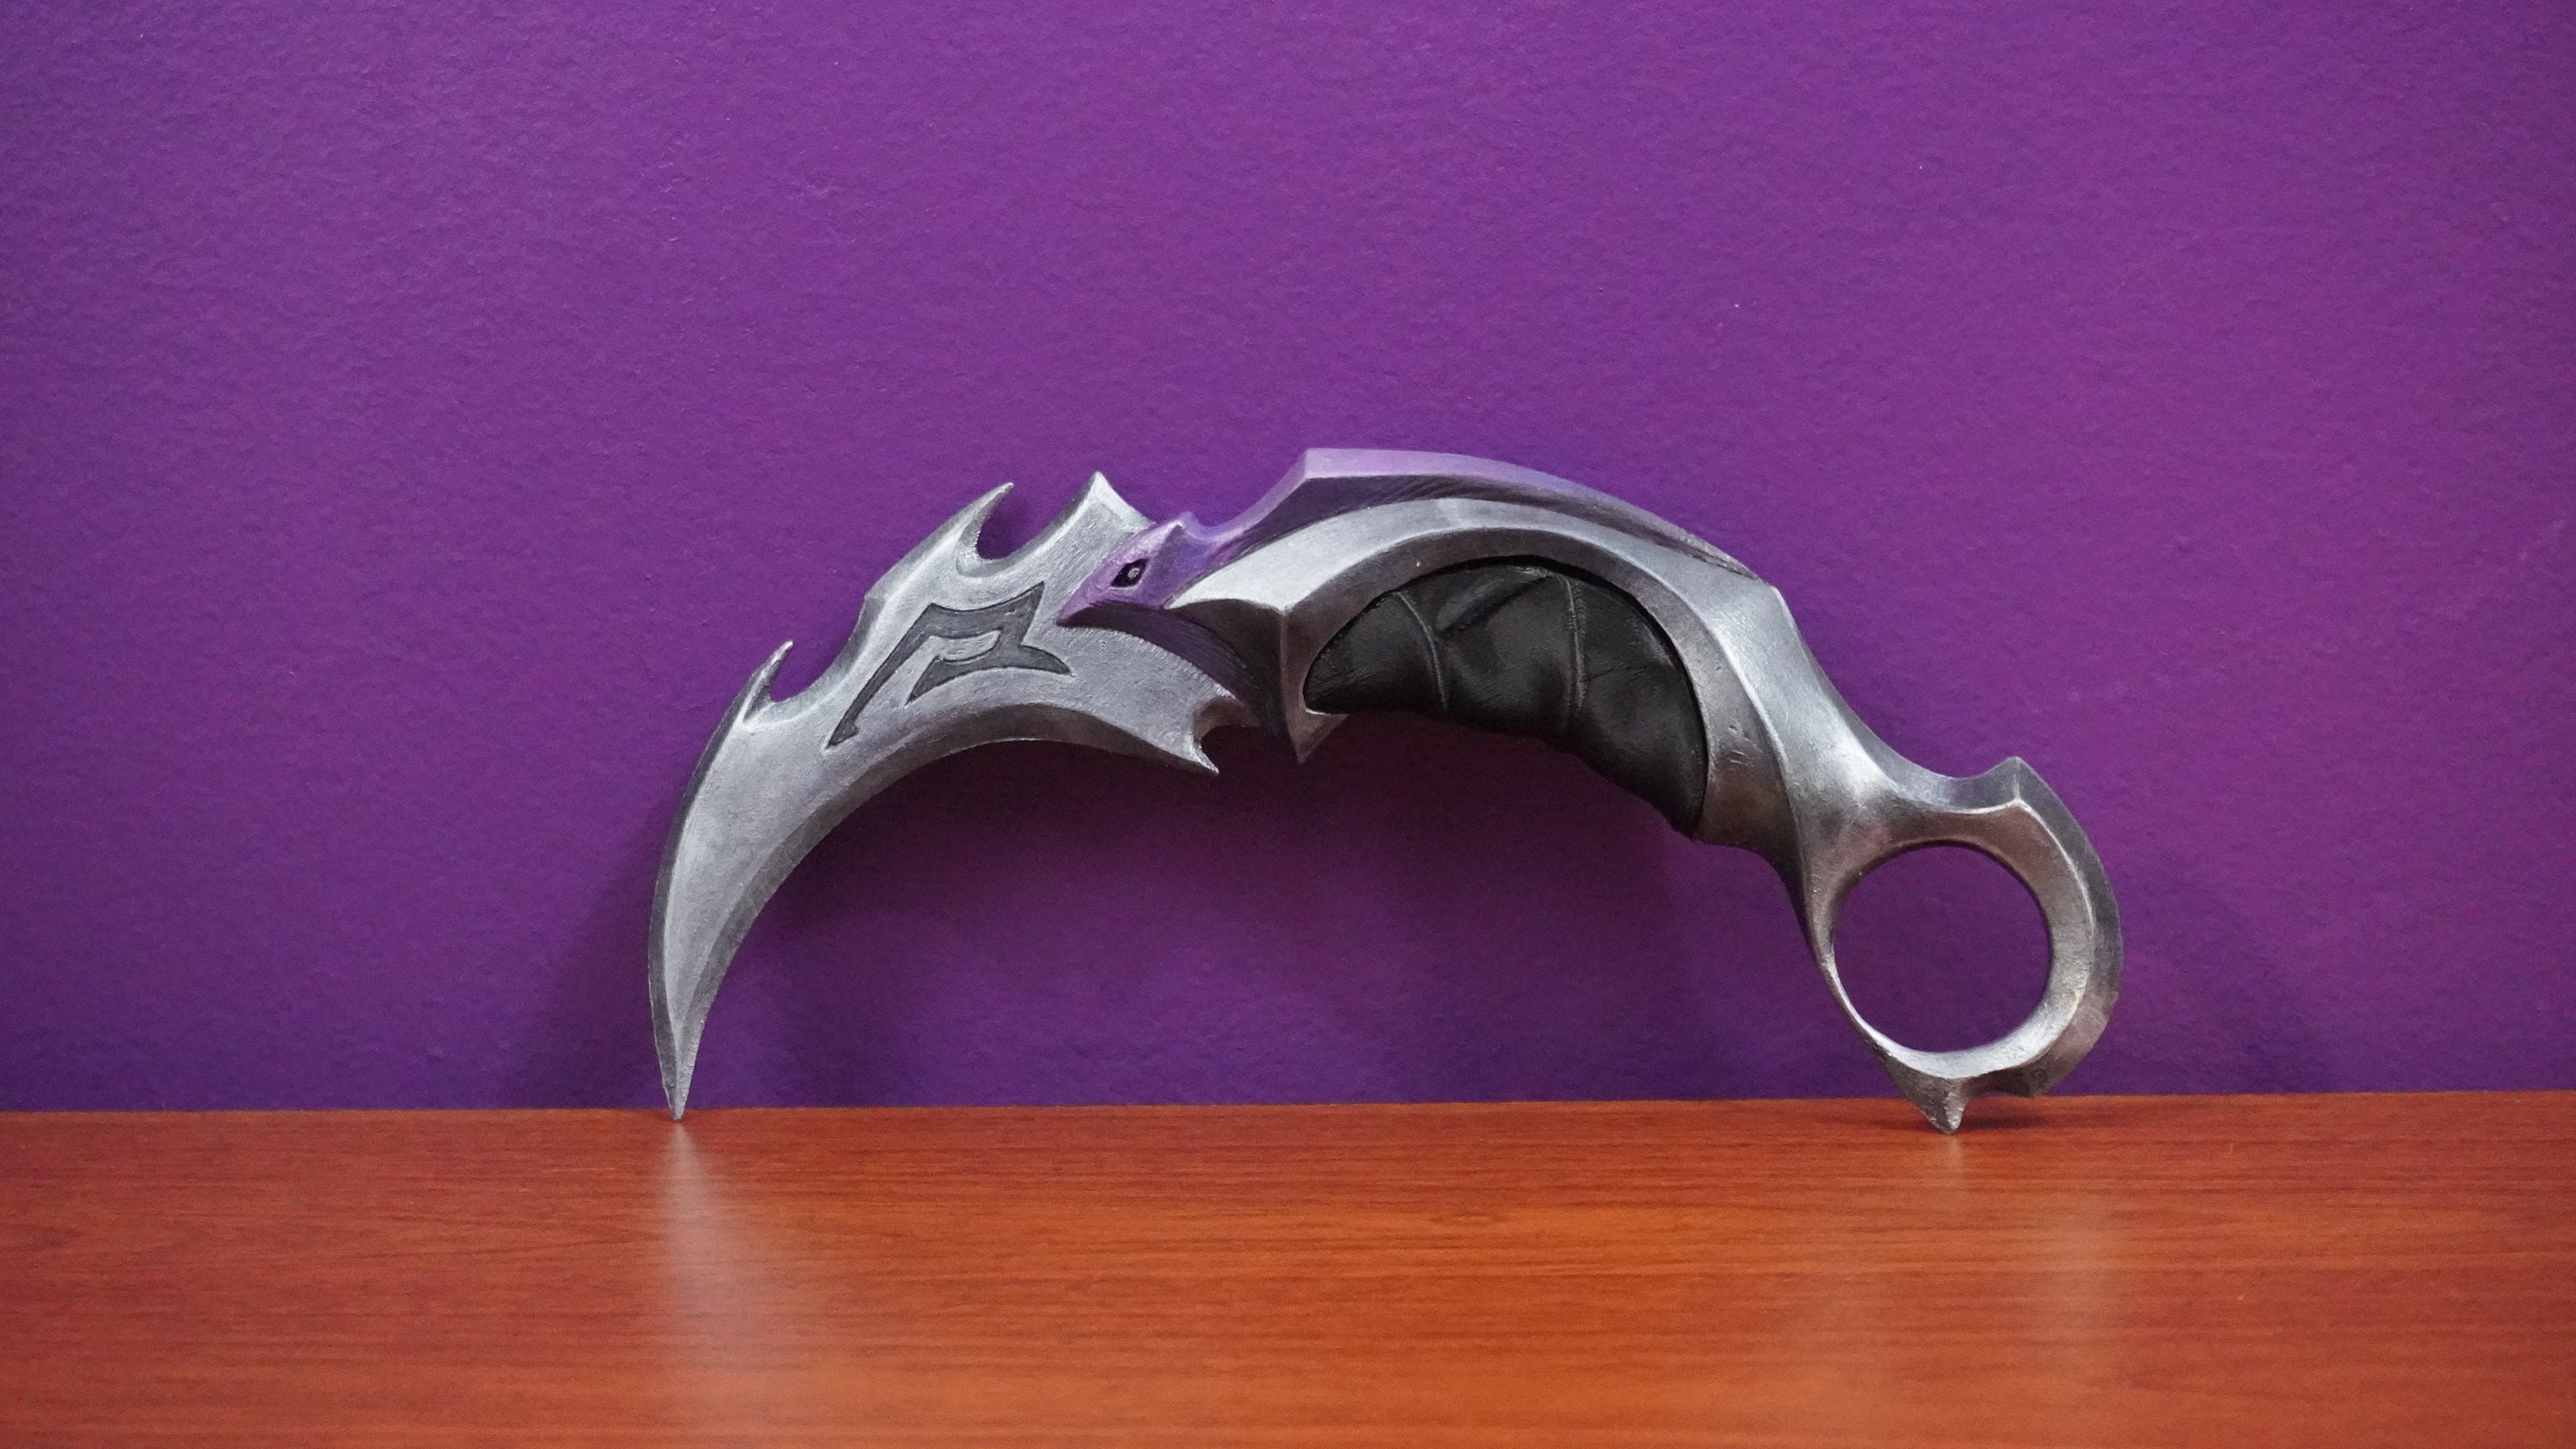 Karambit Knife Fixed Blade with 3D Print – Dispatch Knives